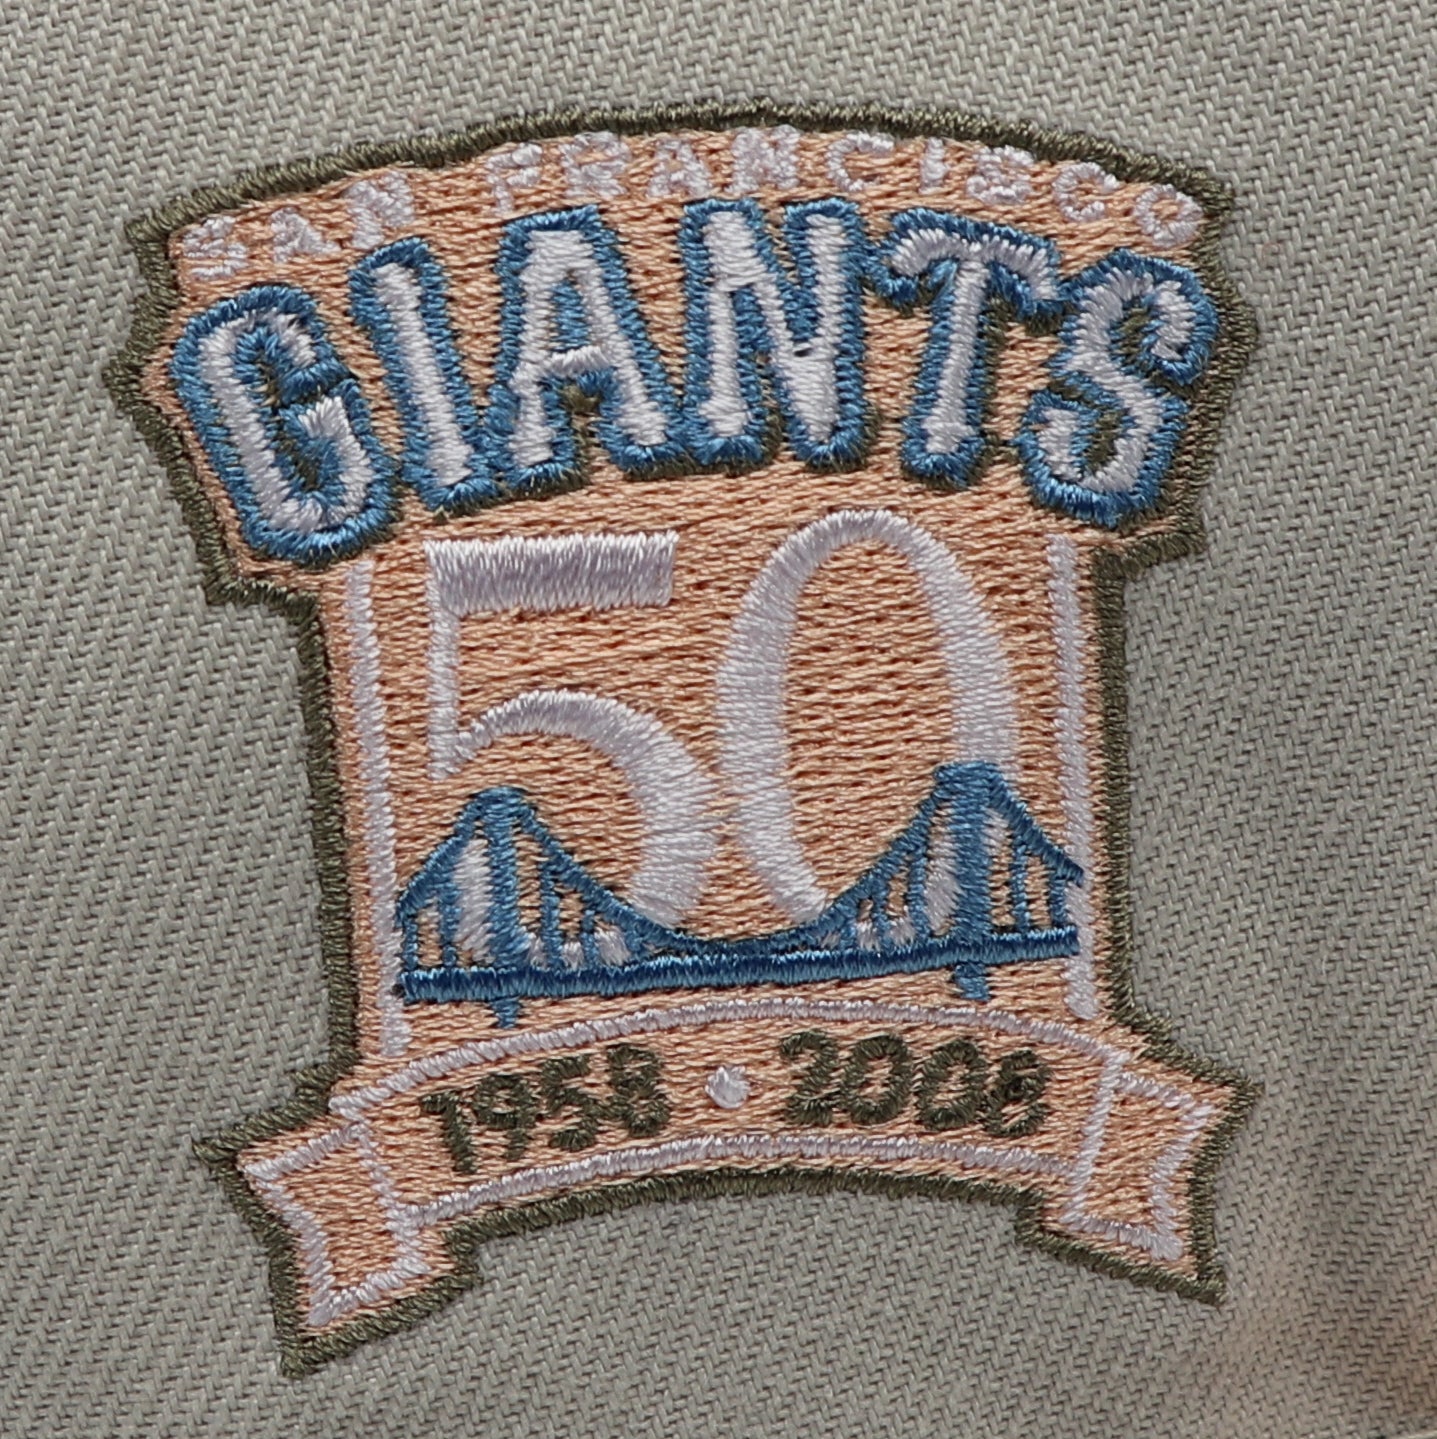 SAN FRANCISCO GIANTS (50TH ANN 1958-2008) NEW ERA 59FIFTY FITTED (SKY BLUE UNDER VISOR)